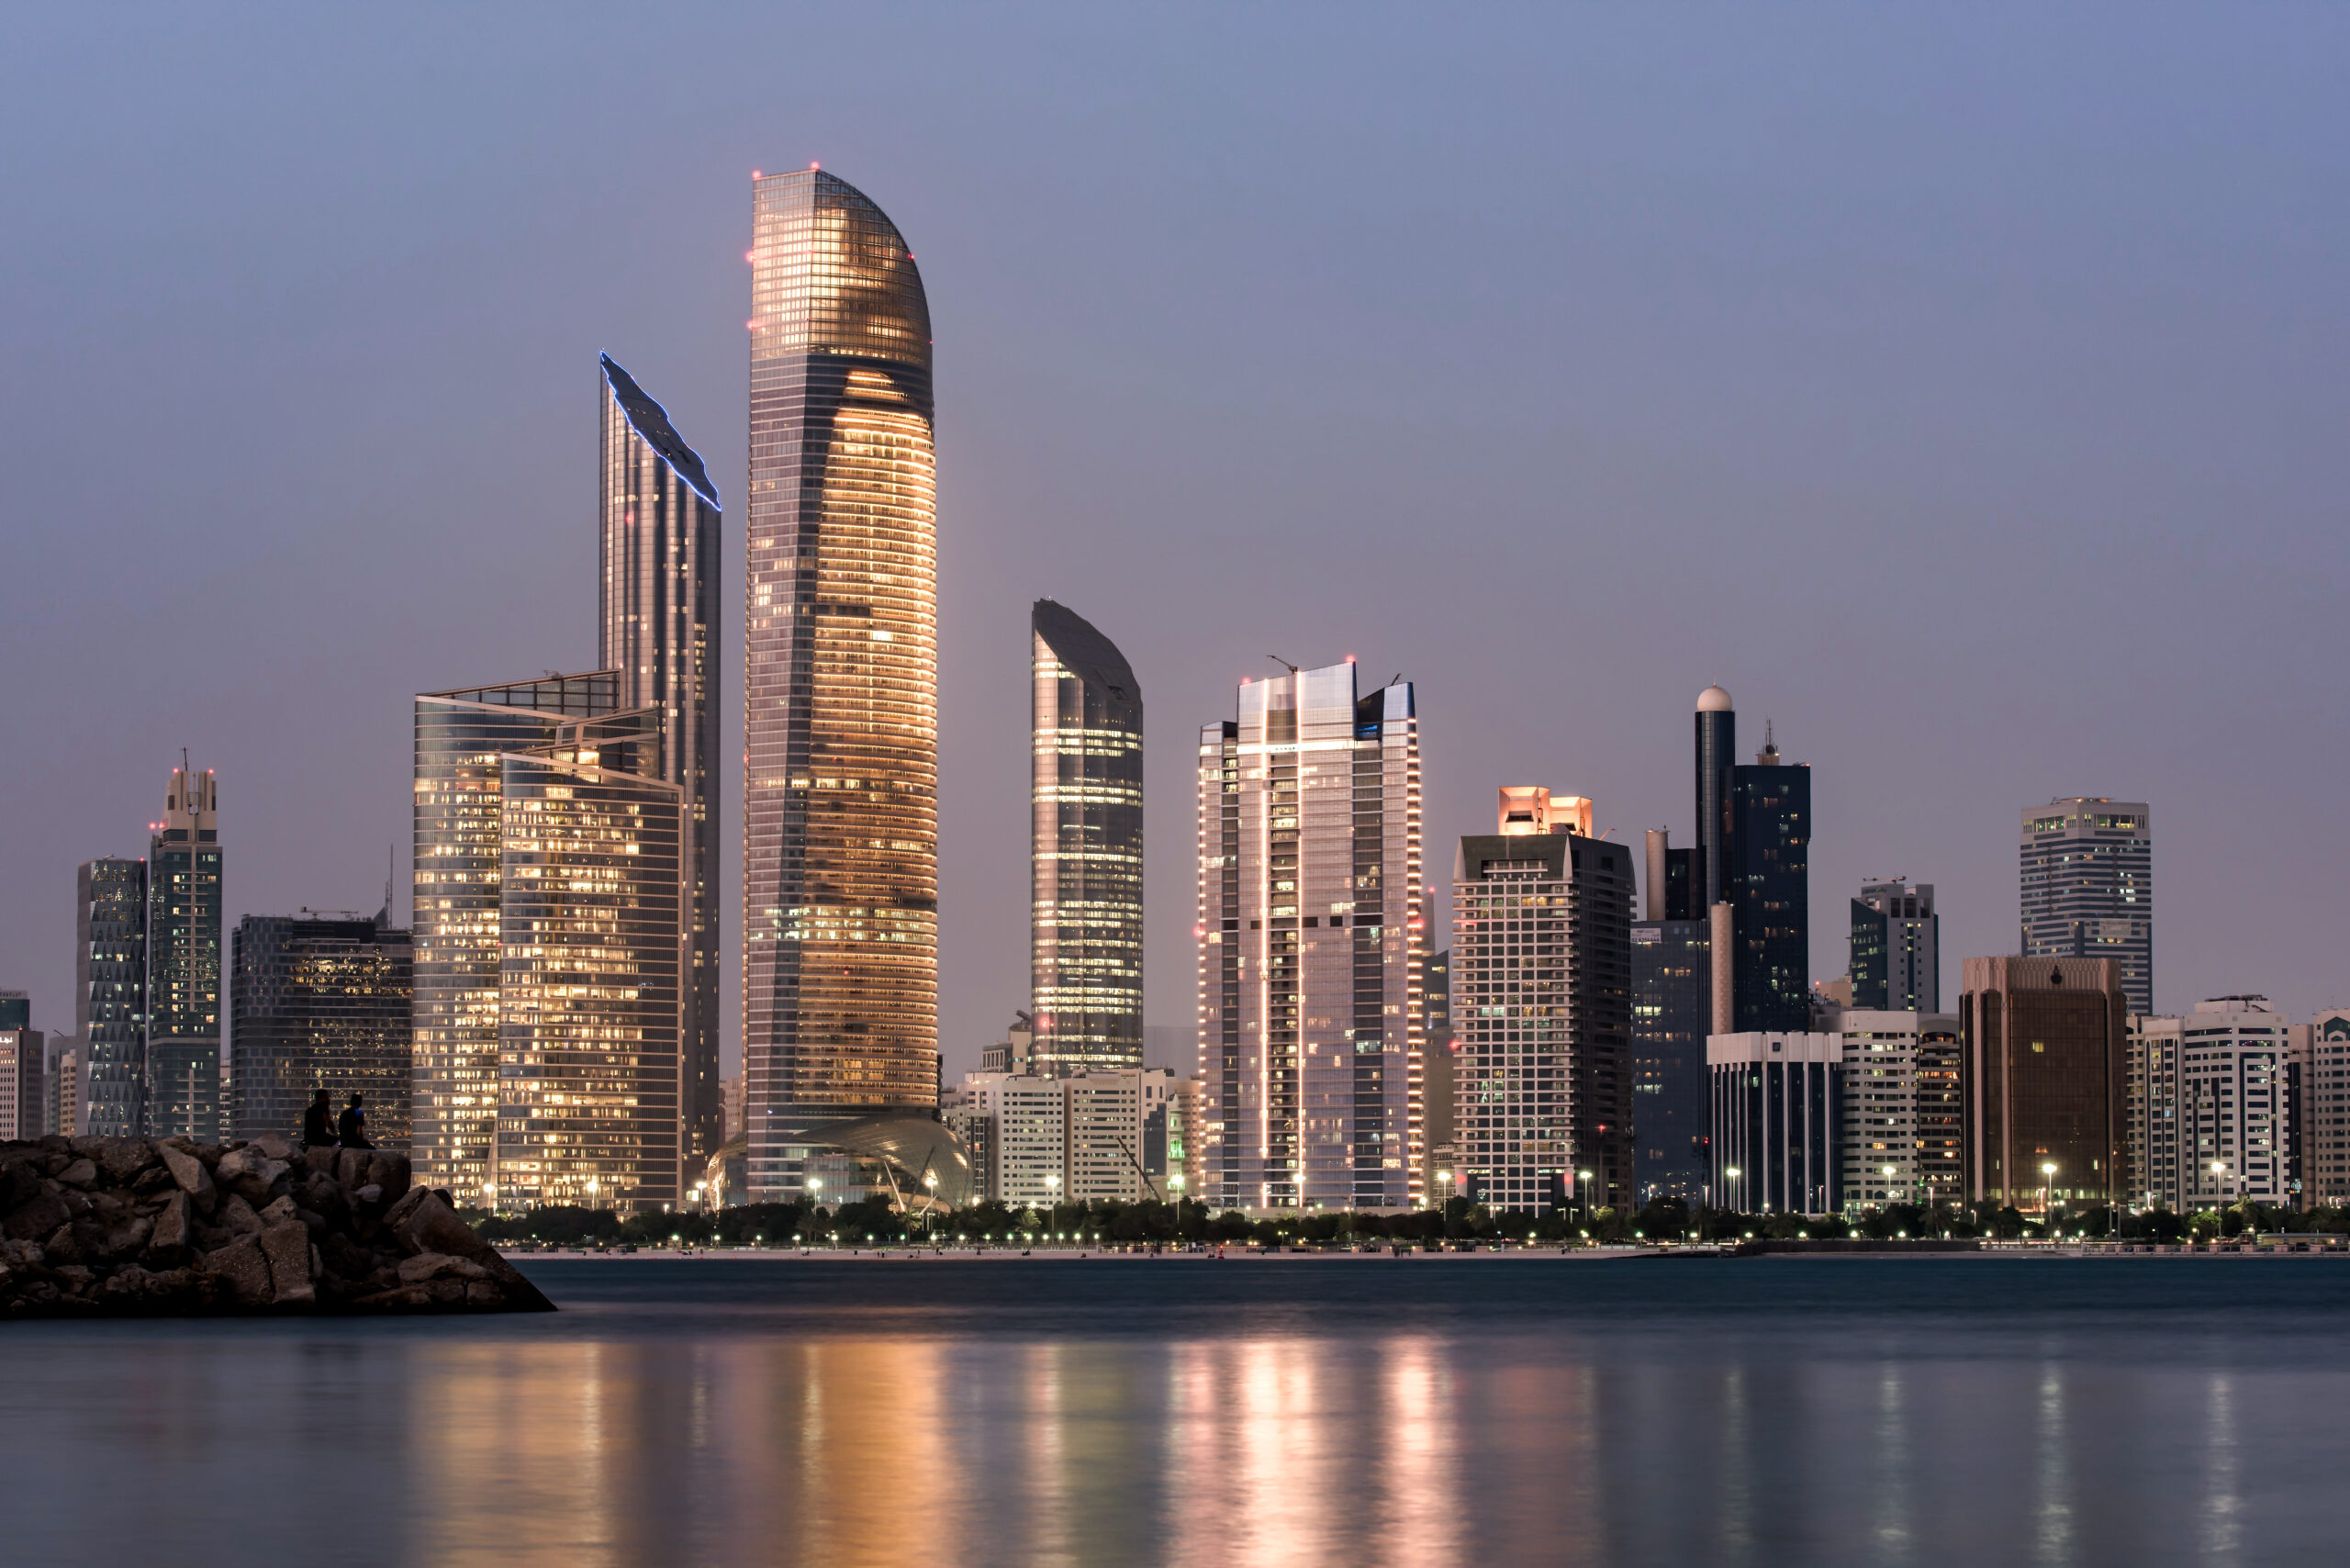 June 23, 2018: Abu Dhabi Seascape with skyscrapers in the background at evening, UAE